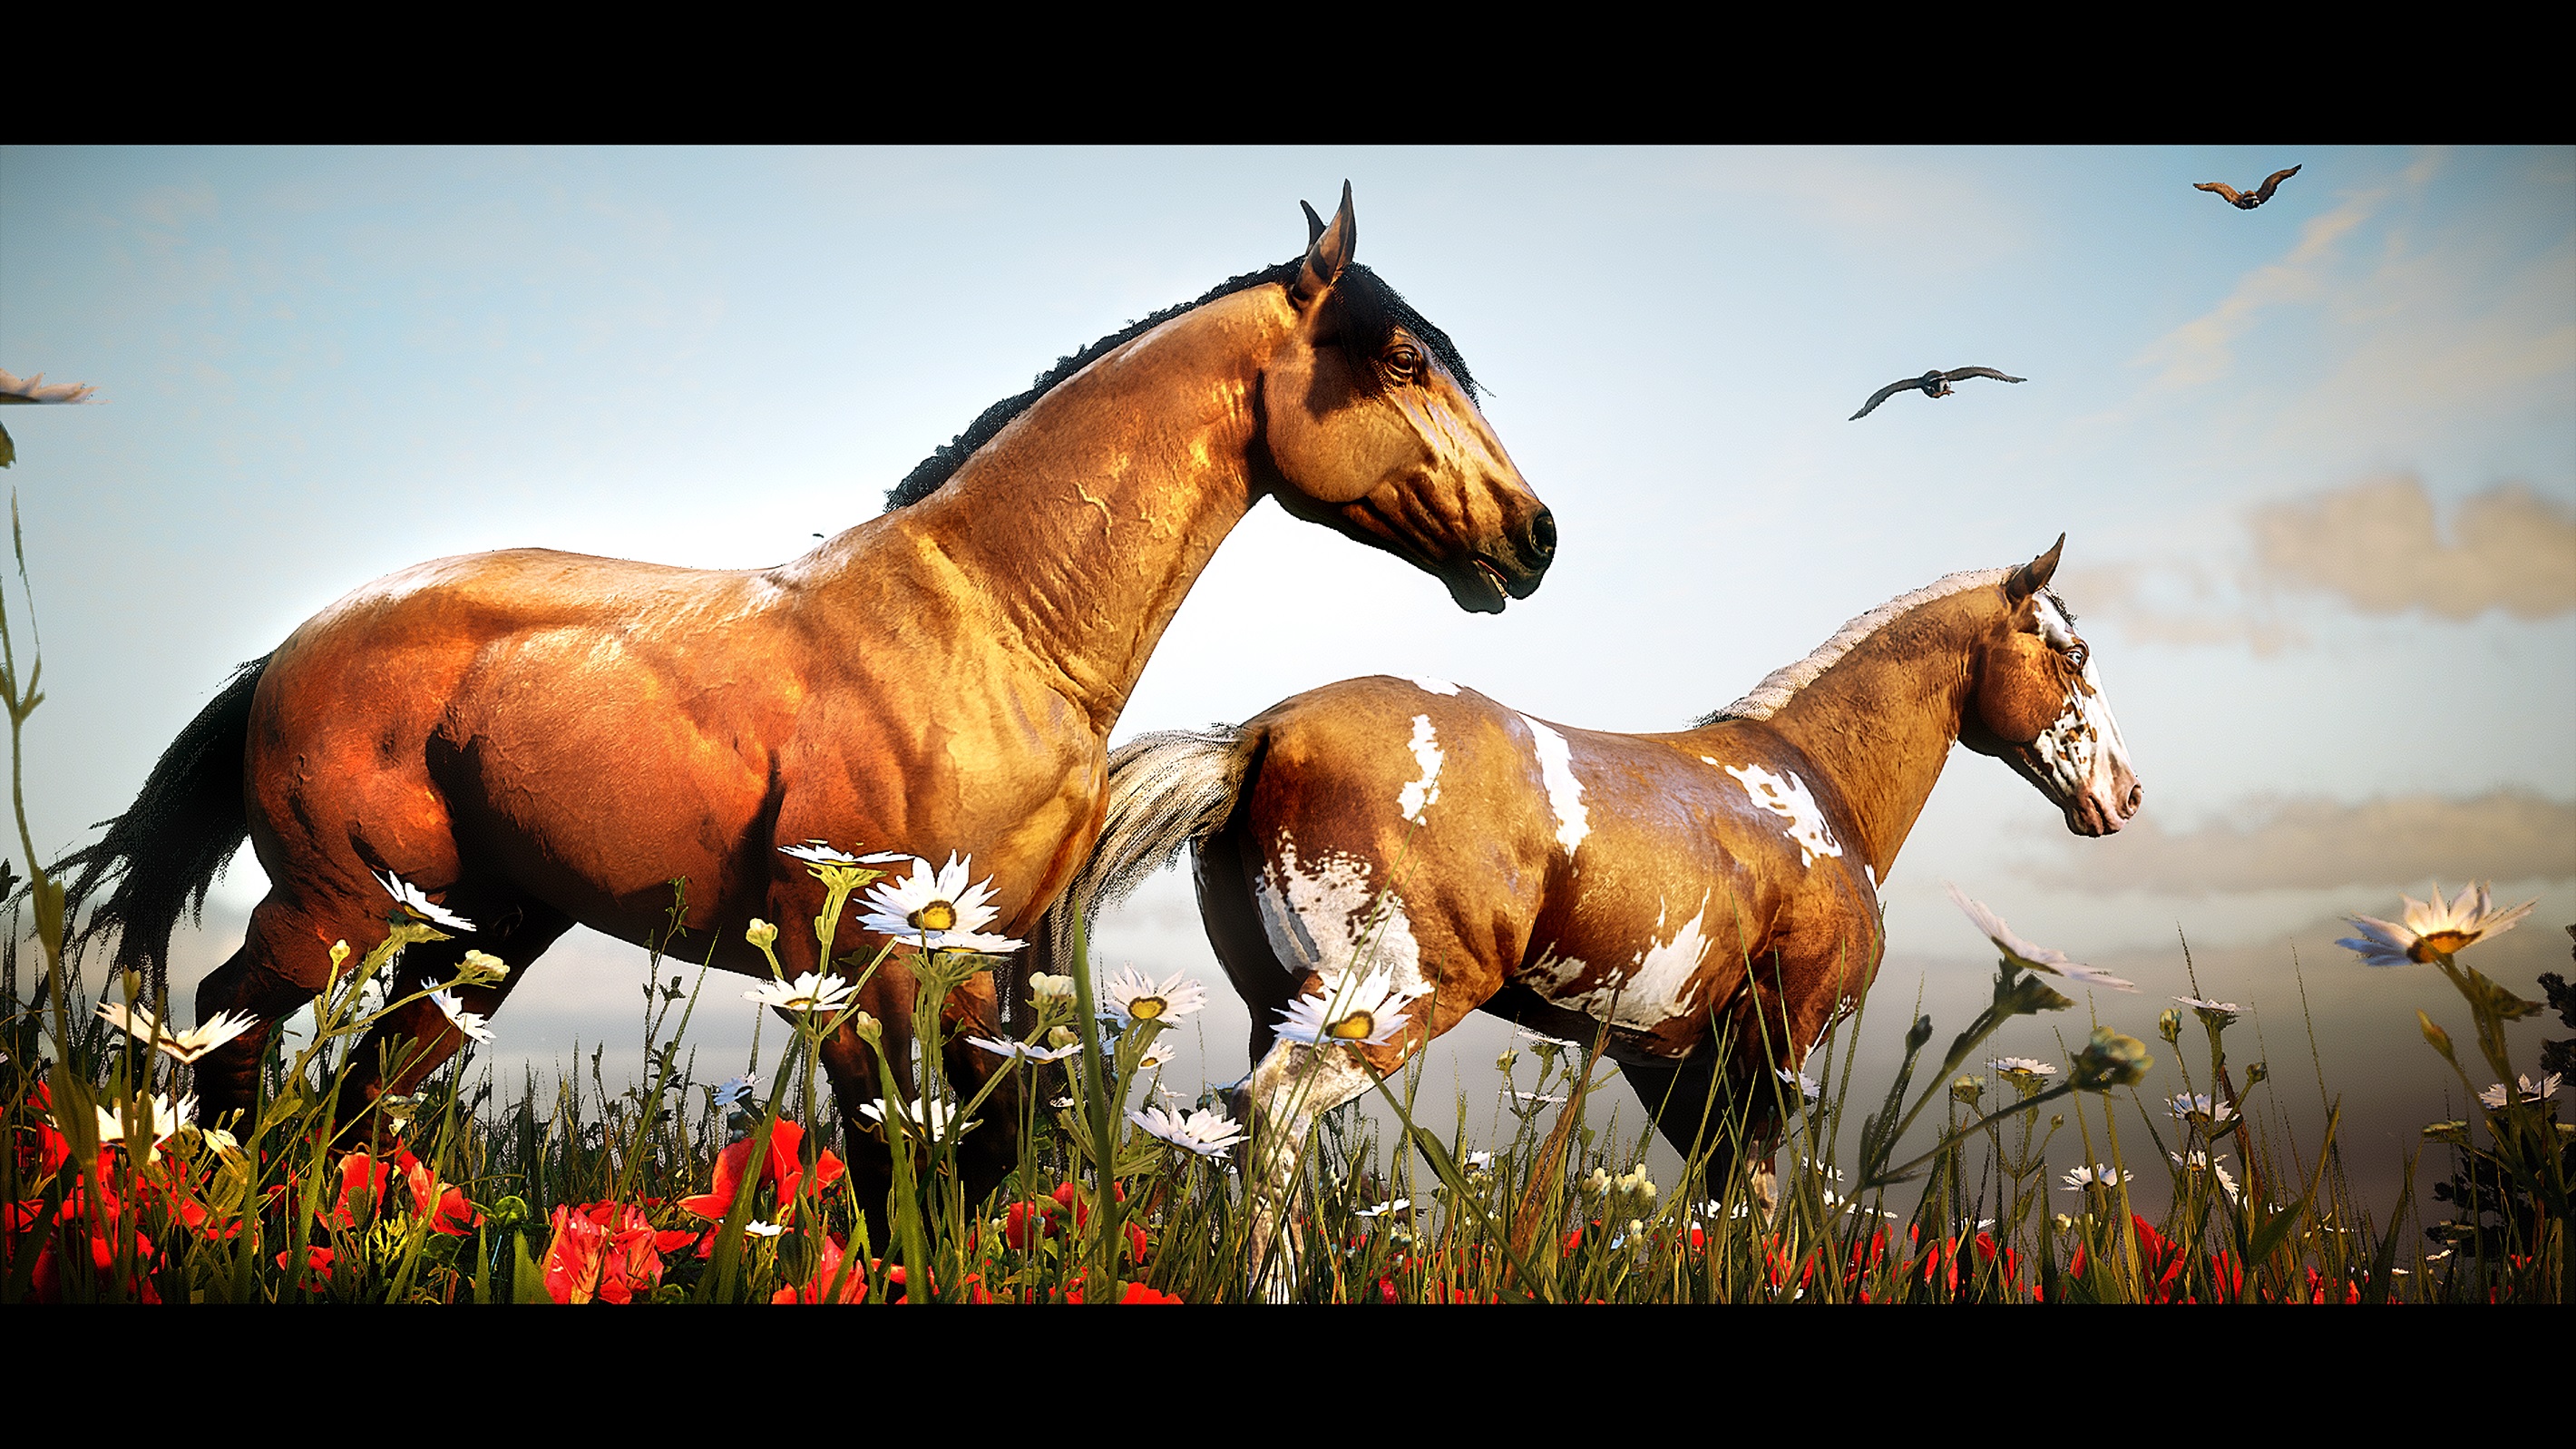 Red Dead Redemption 2 edited in-game photograph of two horses in a field of grass and wildflowers.